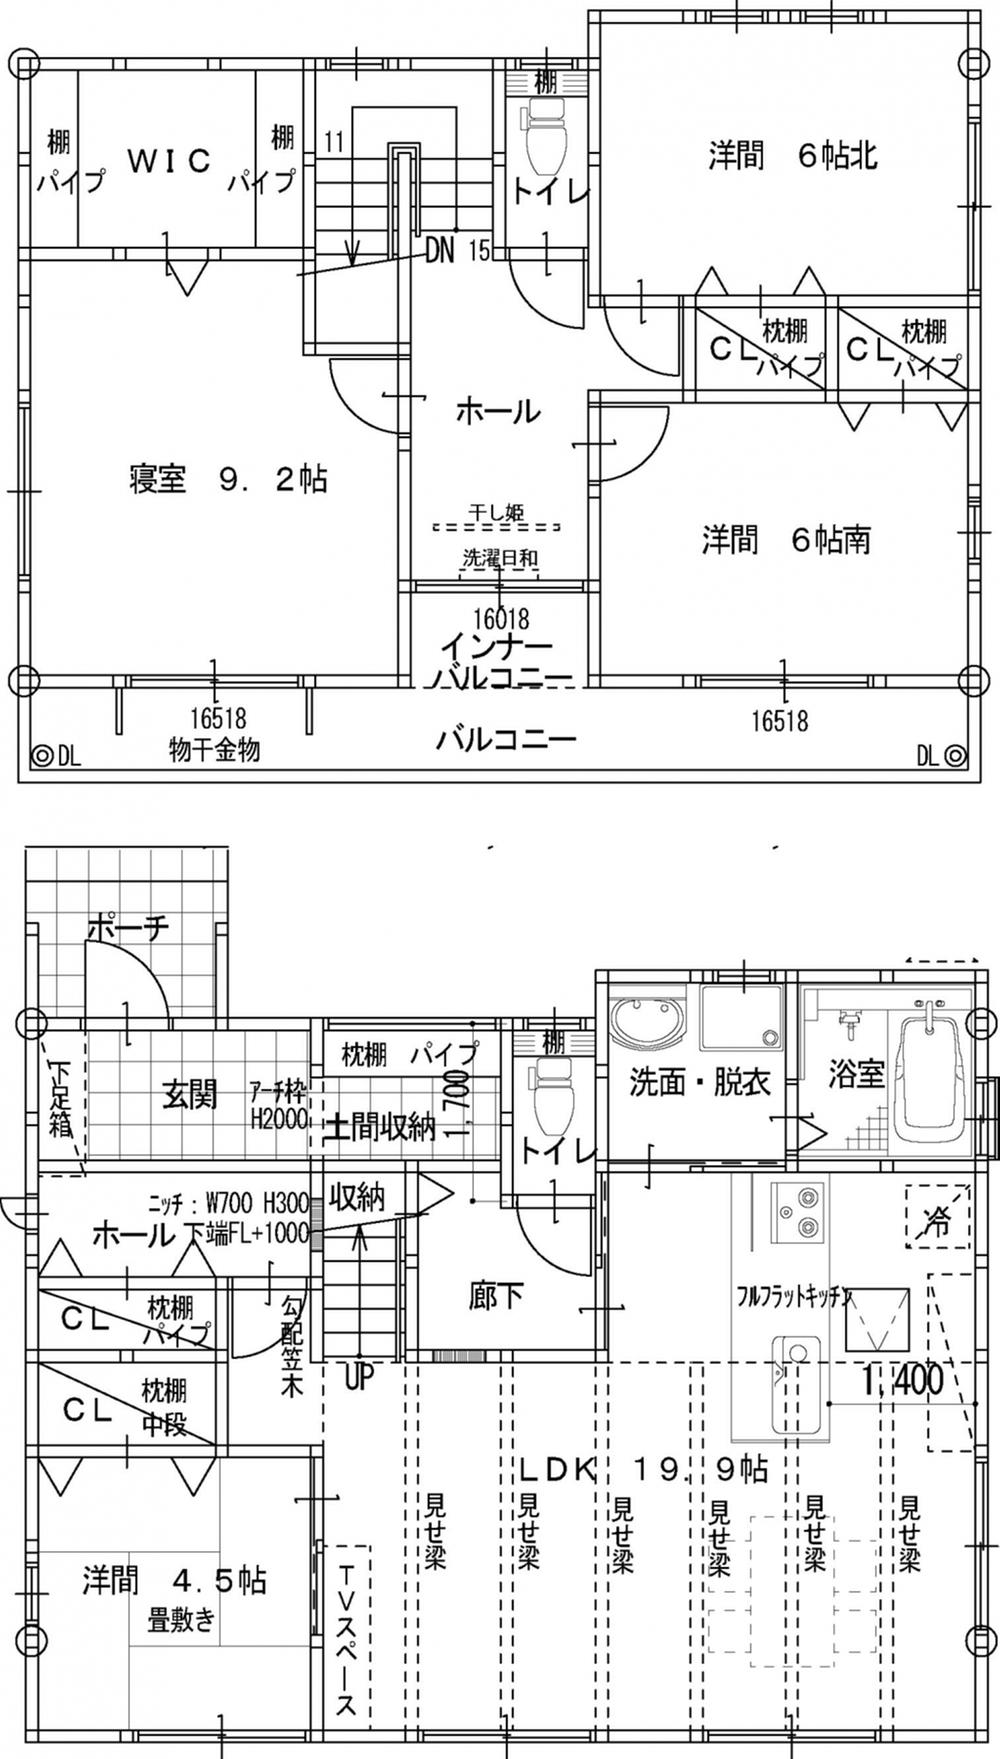 Floor plan. 21.9 million yen, 4LDK, Land area 205.59 sq m , Is a floor plan of attention, such as the building area 117.6 sq m custom home.  By all means, please visit the local ☆  Second floor of the laundry space is also attractive. 